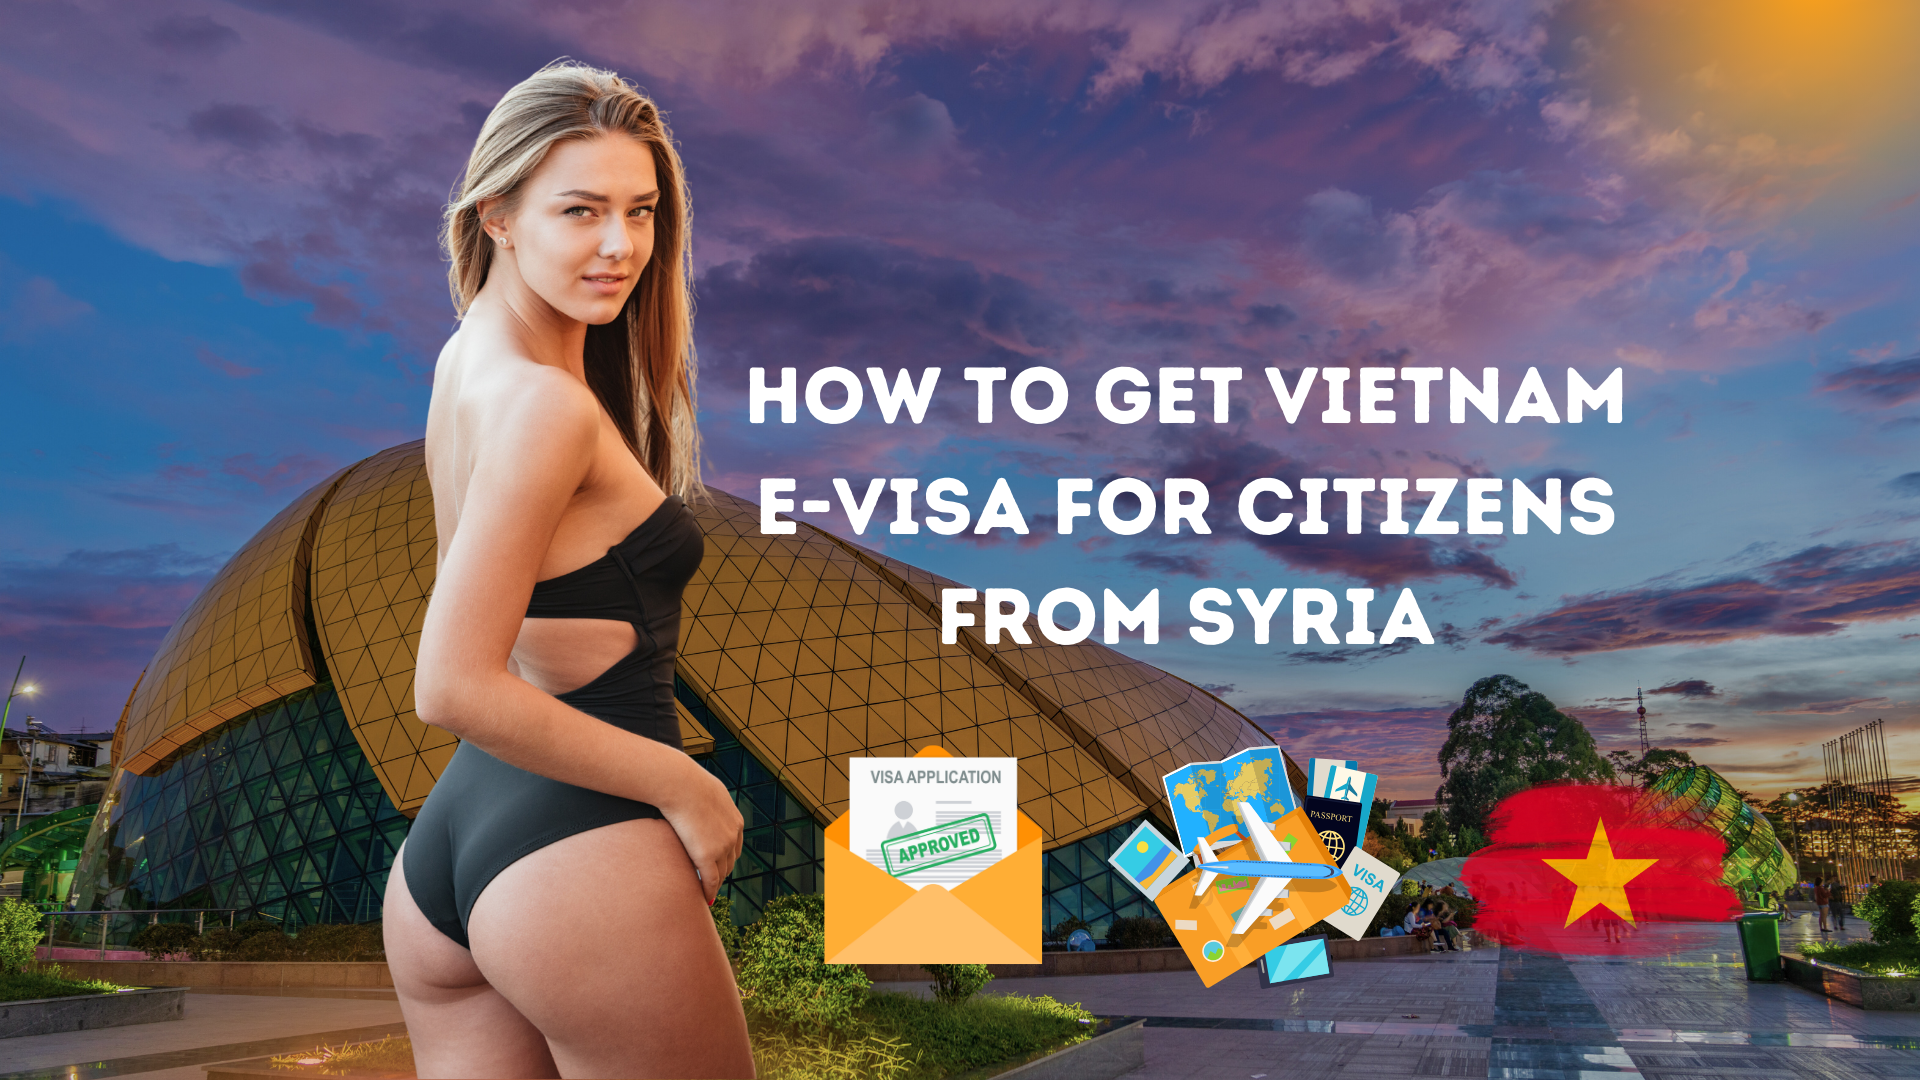 Vietnam Evisa for Citizens from Syria